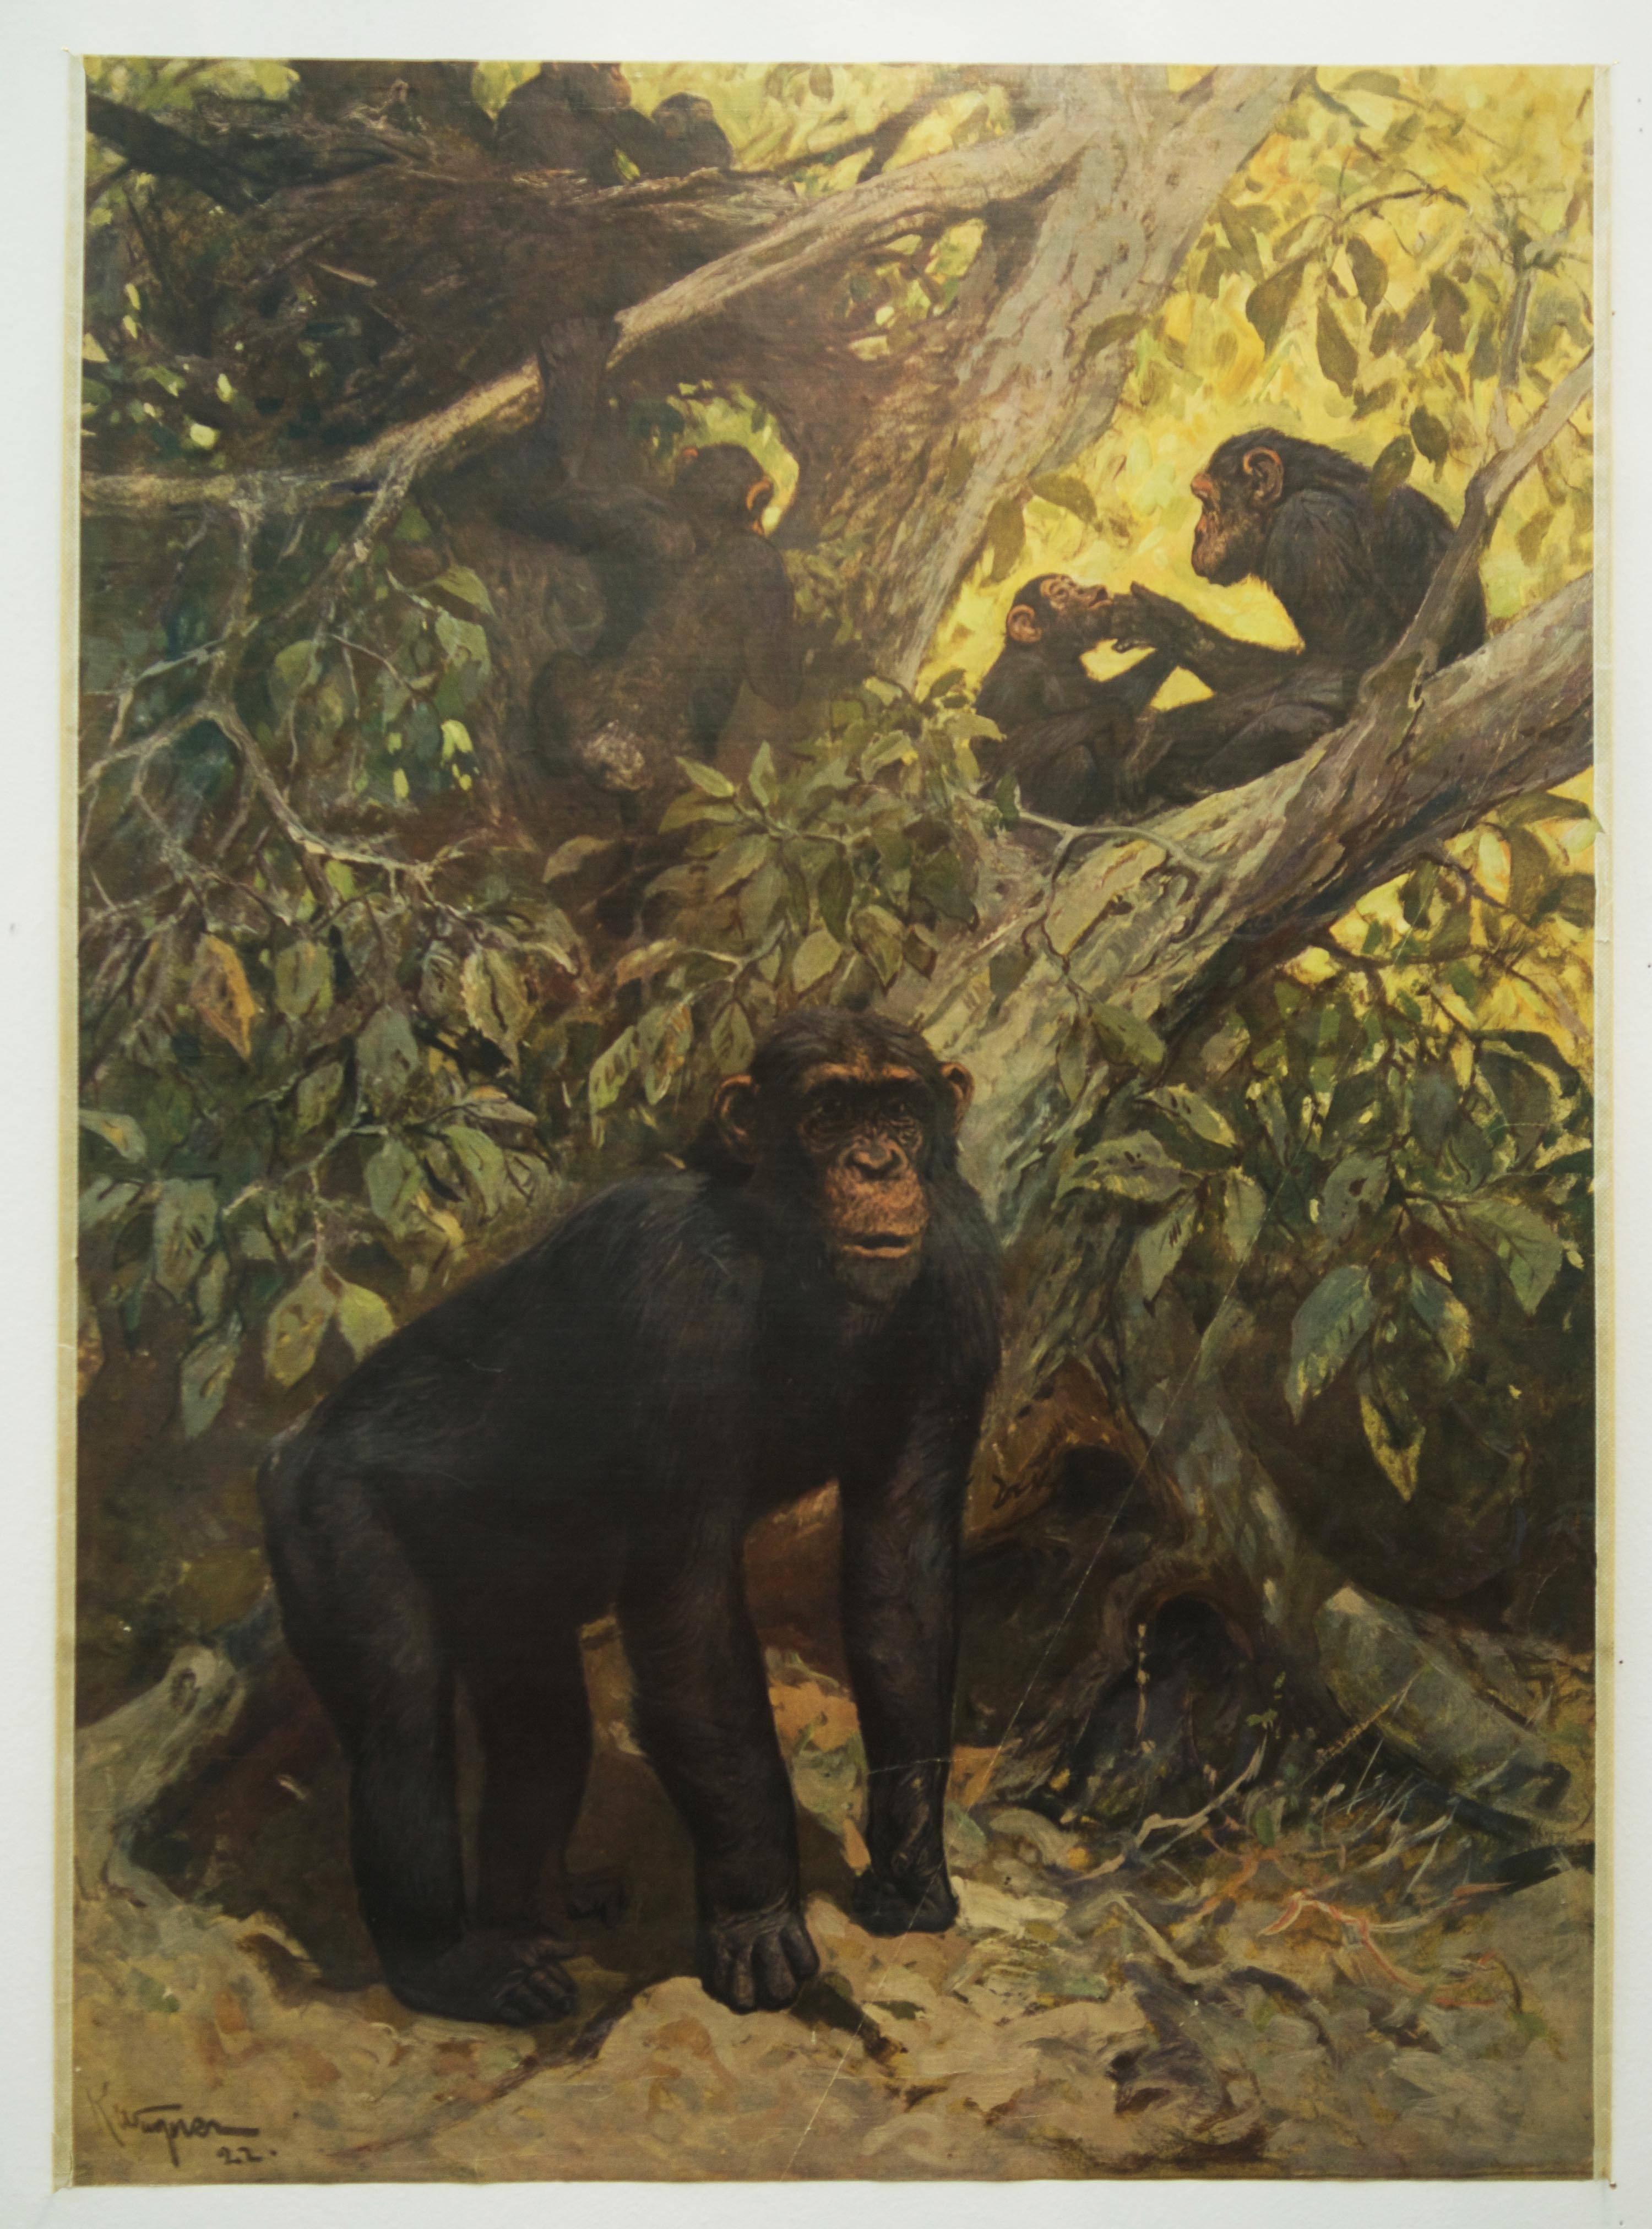 Great old wall chart depicting "chimp". the chart is signer K. Wagner.
Oringinaly painted in 1922. This is a reprint propably from the 1960s.
Colorful print on paper.
Good original condition, age-related traces of usage, partly fissures